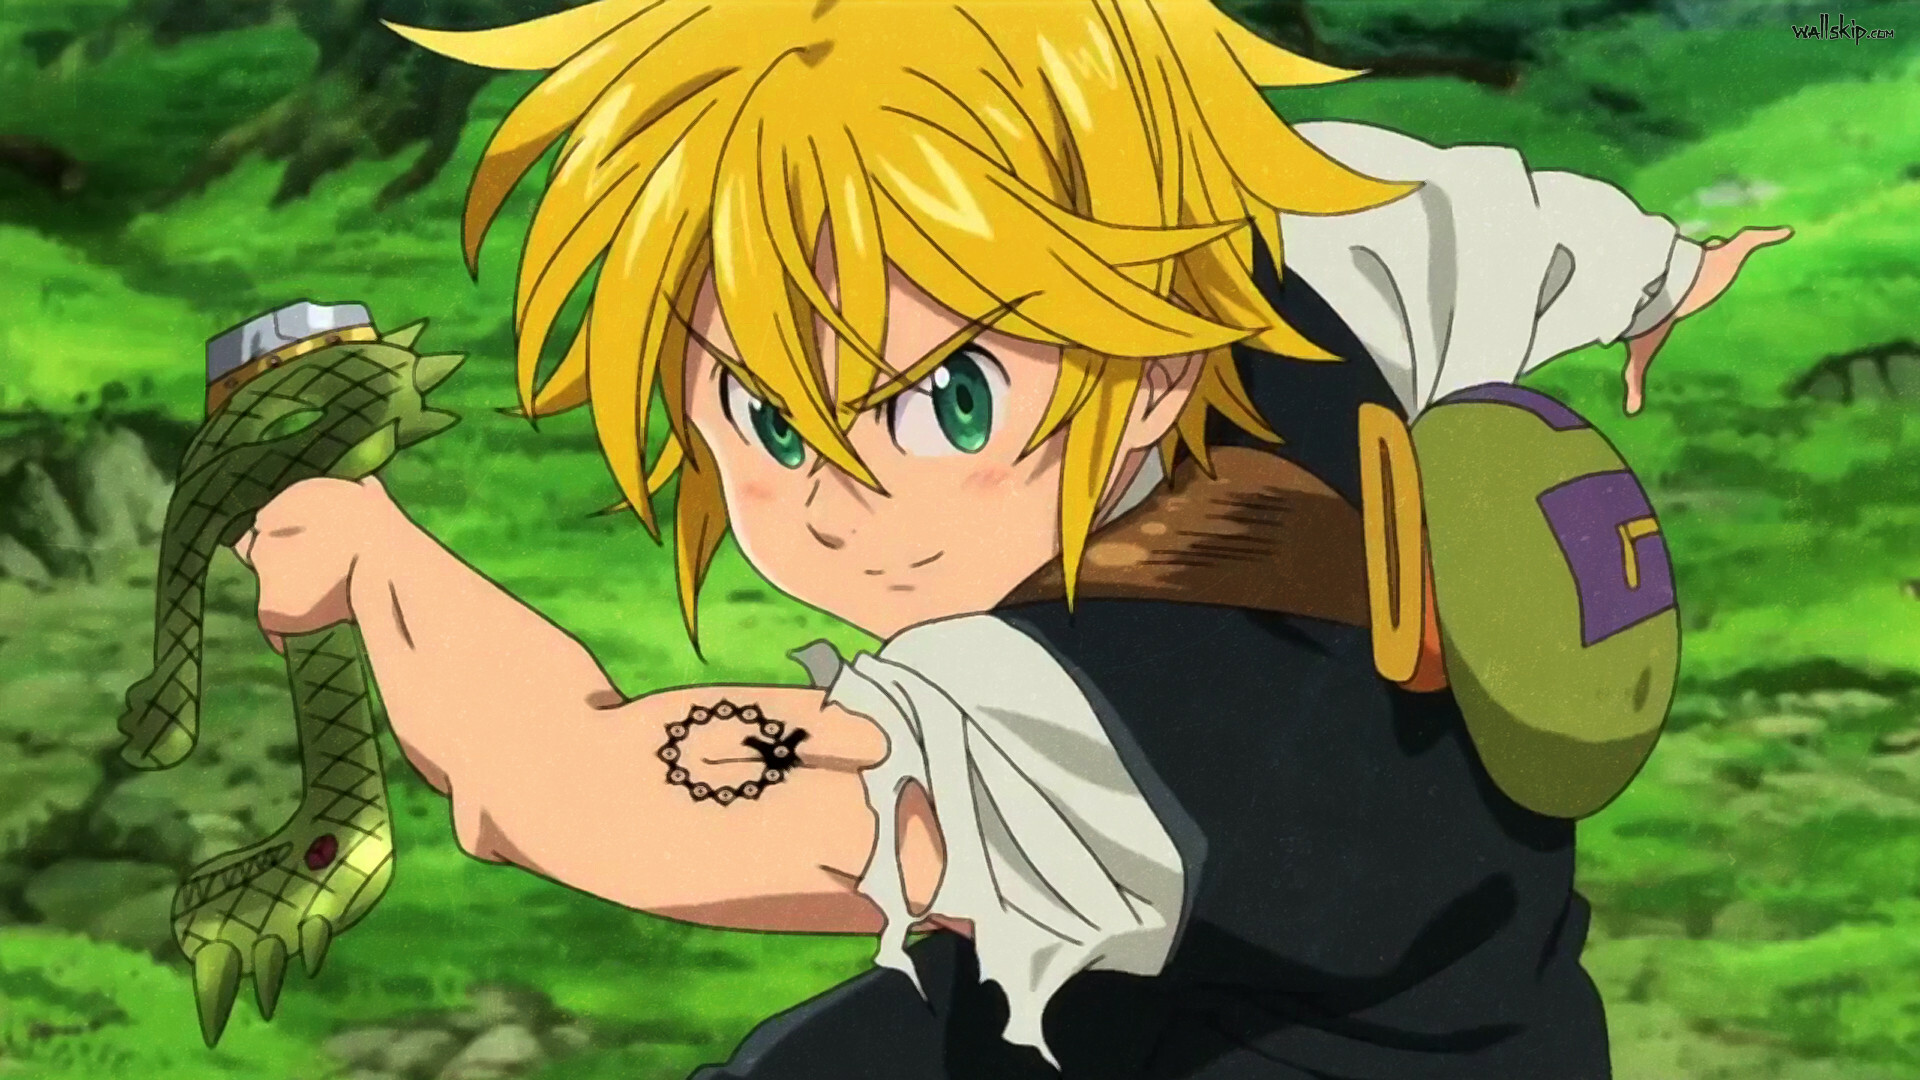 The Seven Deadly Sins: Cursed by Light: Meliodas the Love, the head of the Ten Commandments. 1920x1080 Full HD Wallpaper.